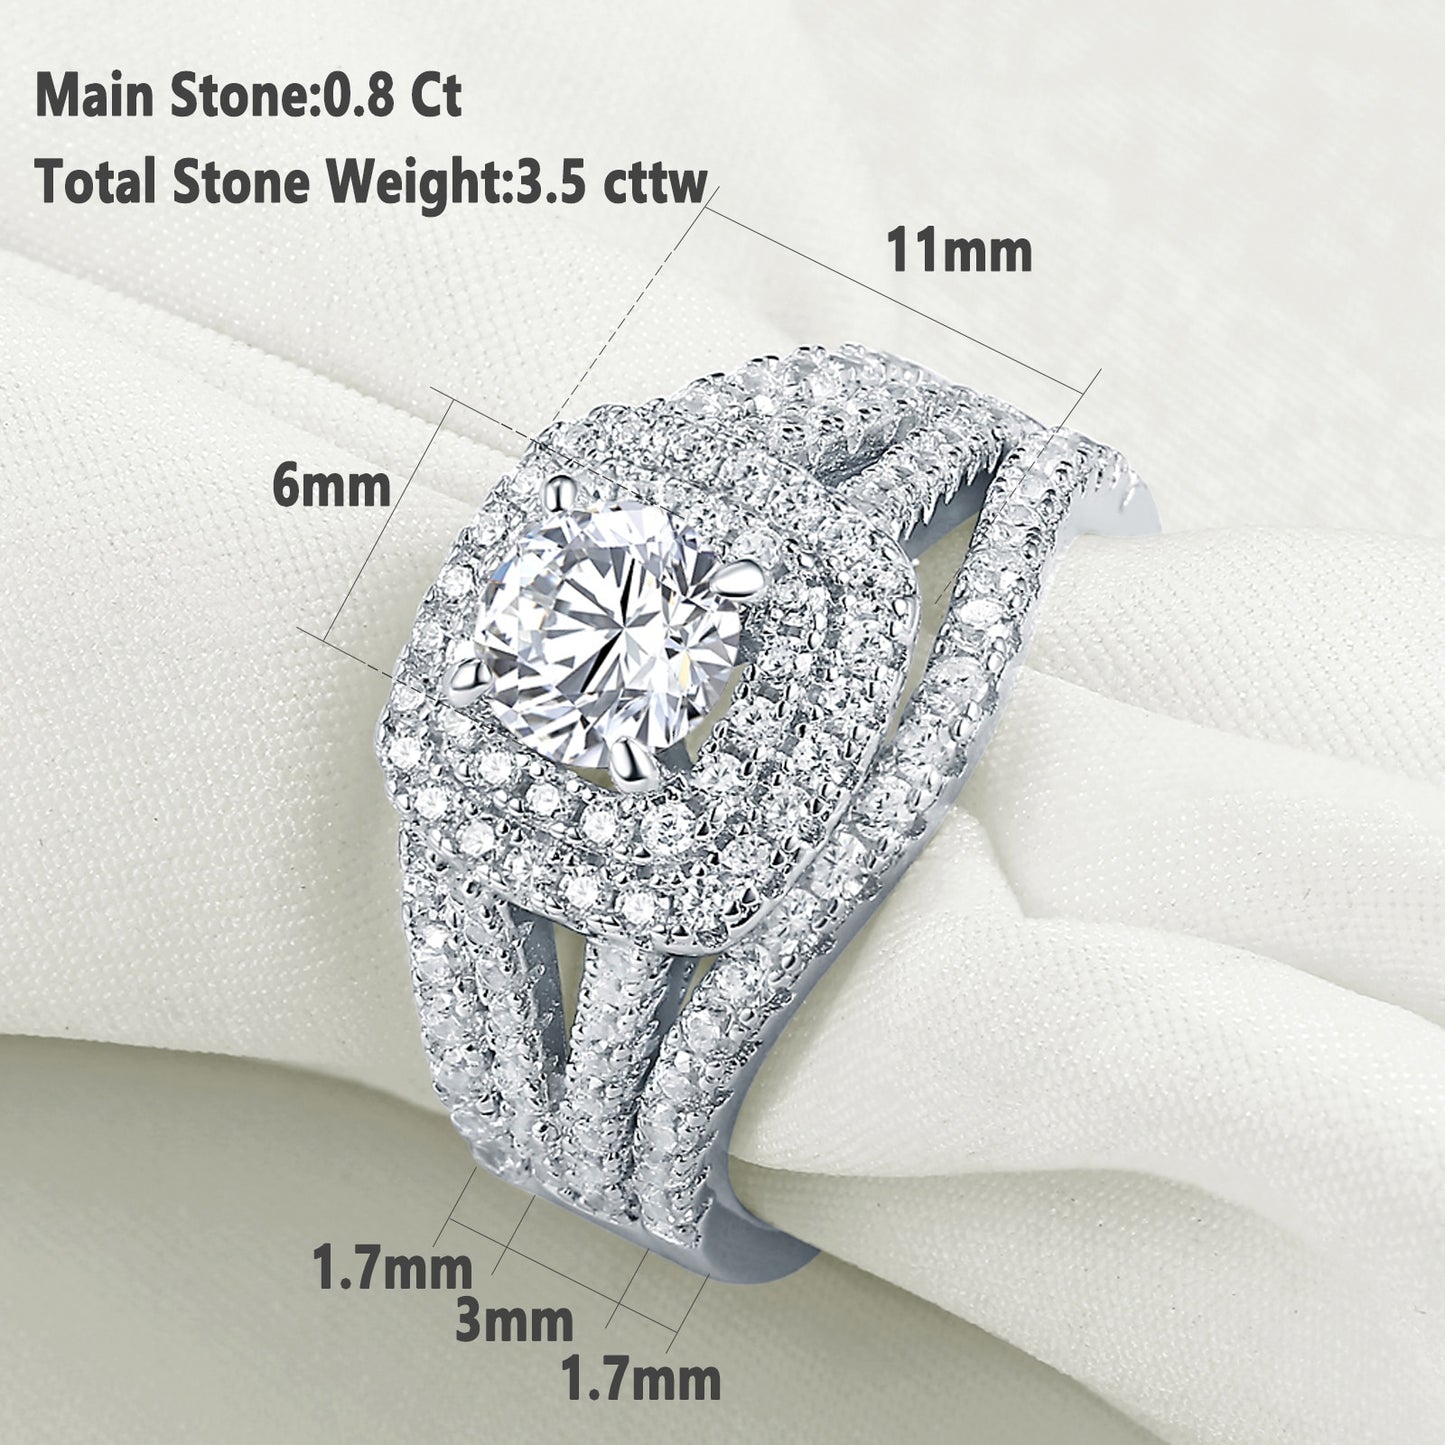 TrophyWife Collection | 3 Pieces Luxury Engagement Wedding Rings Set